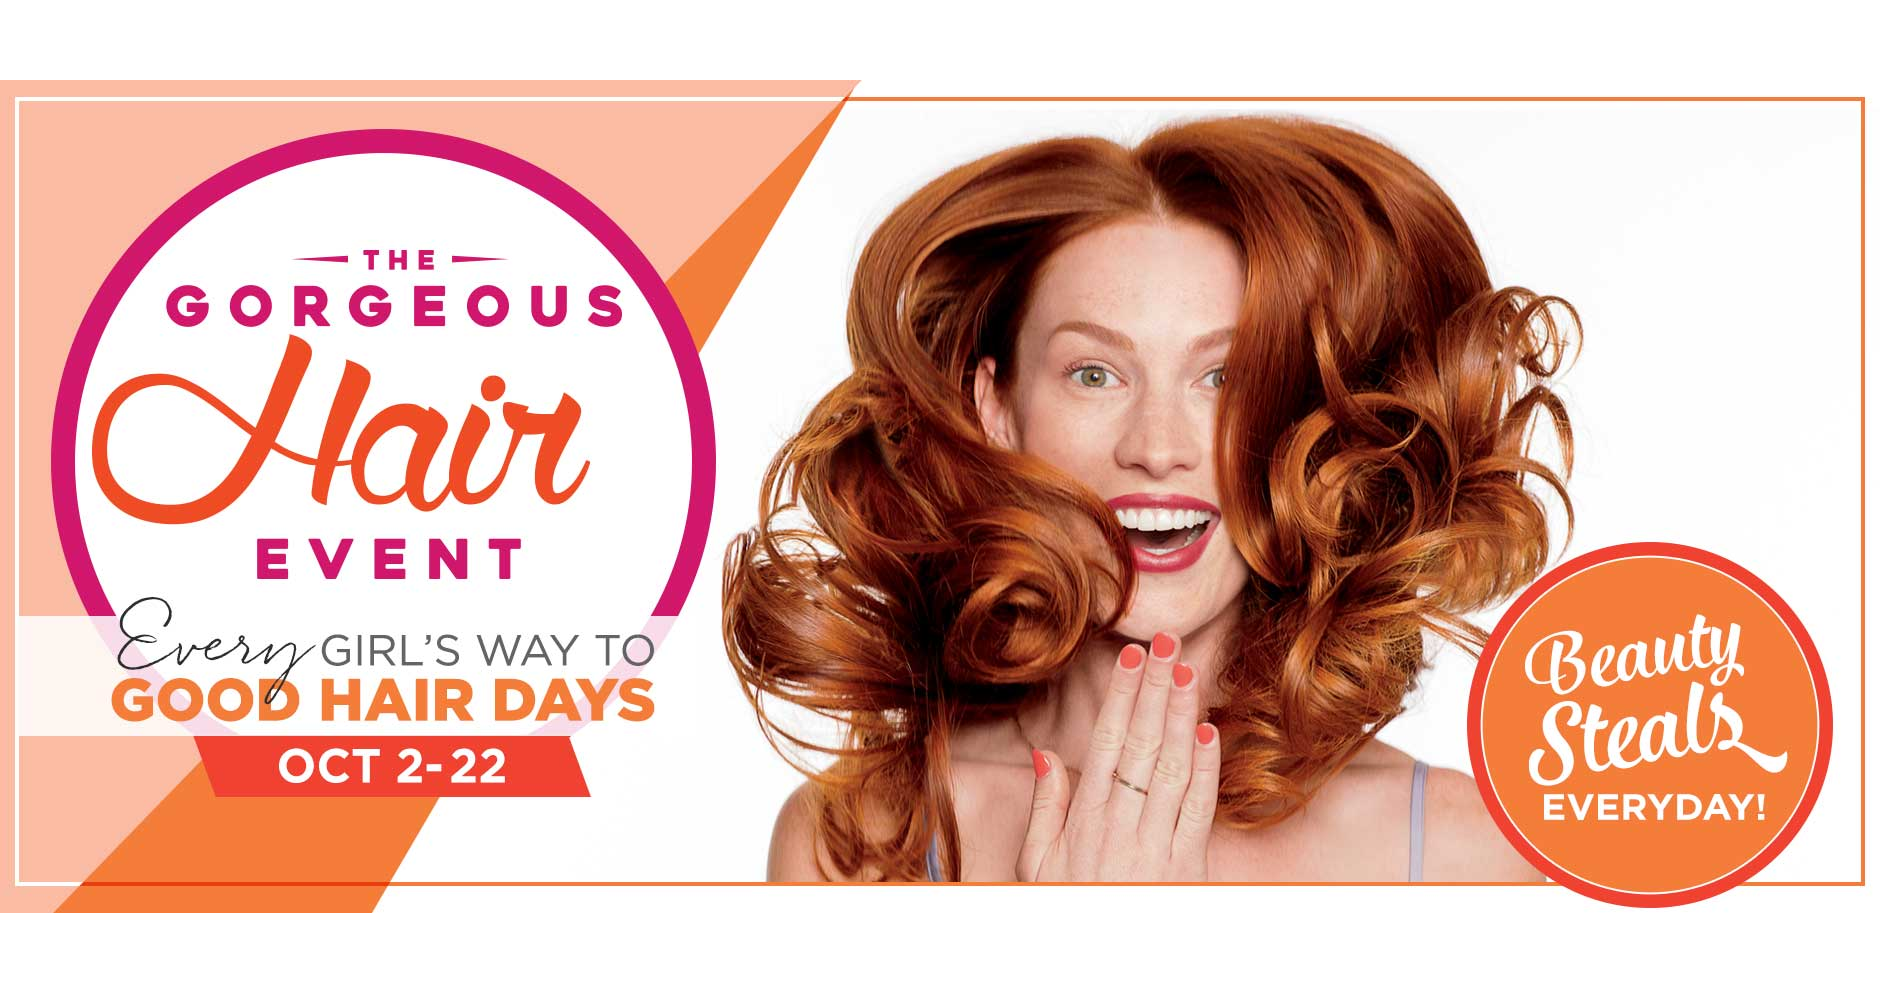 Ulta: The Gorgeous Hair Event Going On Through October 22nd! New Deals Each Day!